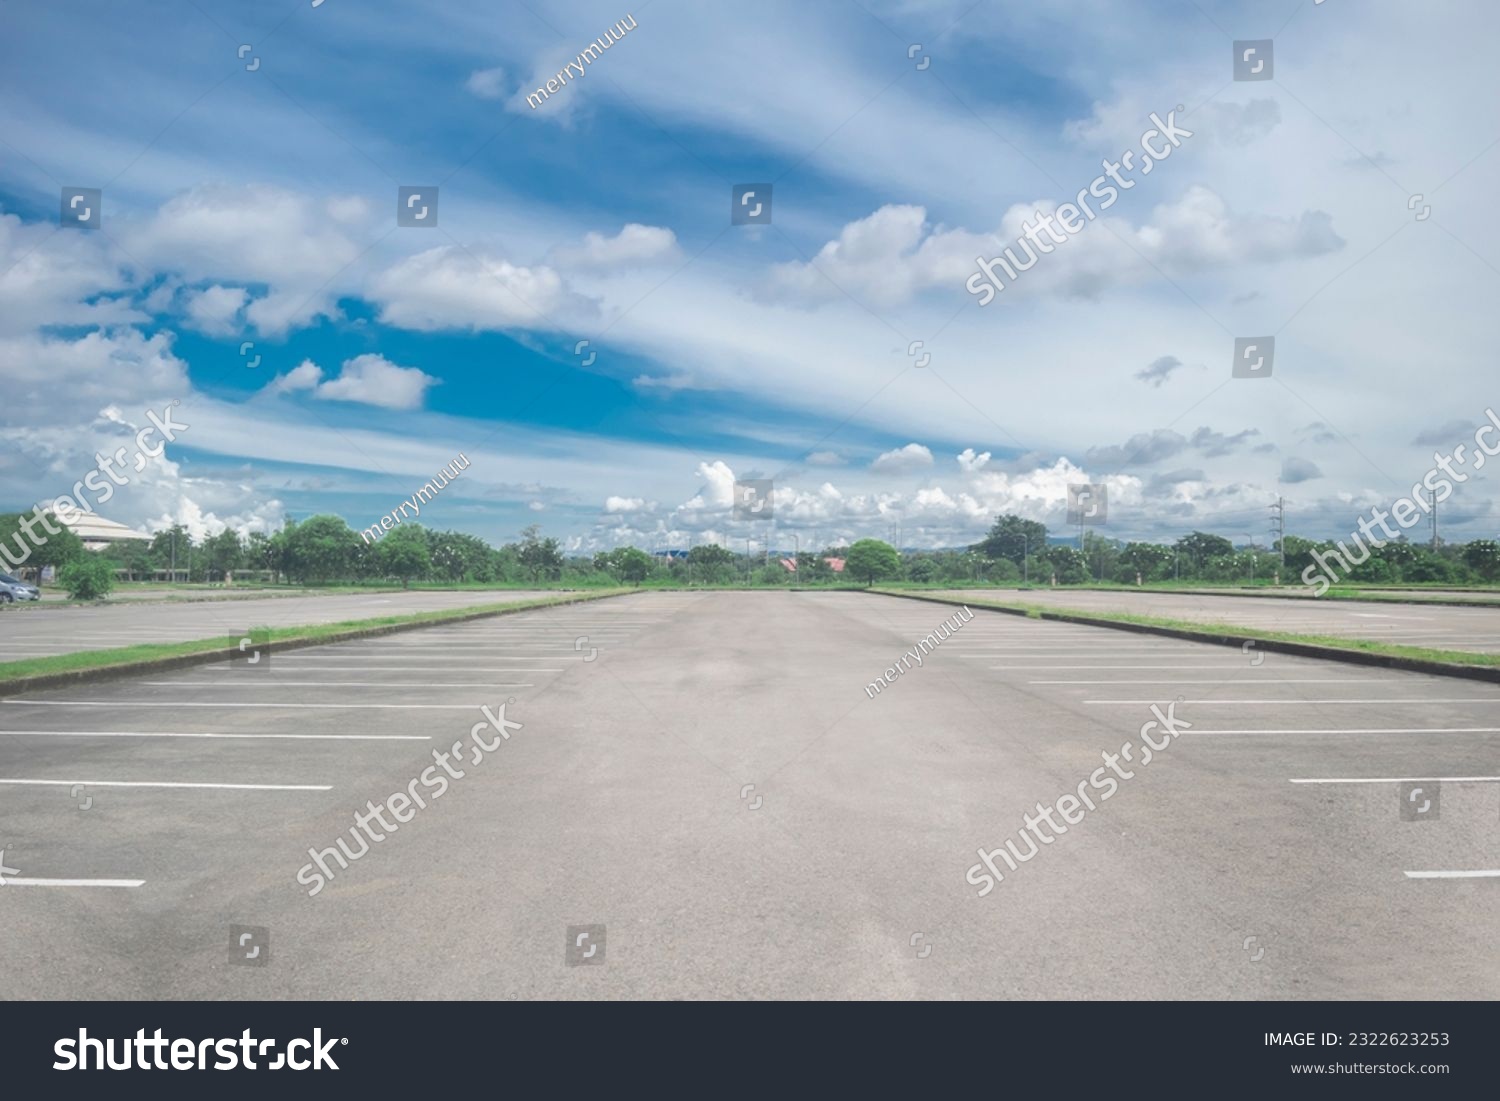 Wide empty asphalt parking lot background. with many cars parked background. outdoor empty space parking lot with trees and cloudy sky. outside parking lot in a park
 #2322623253